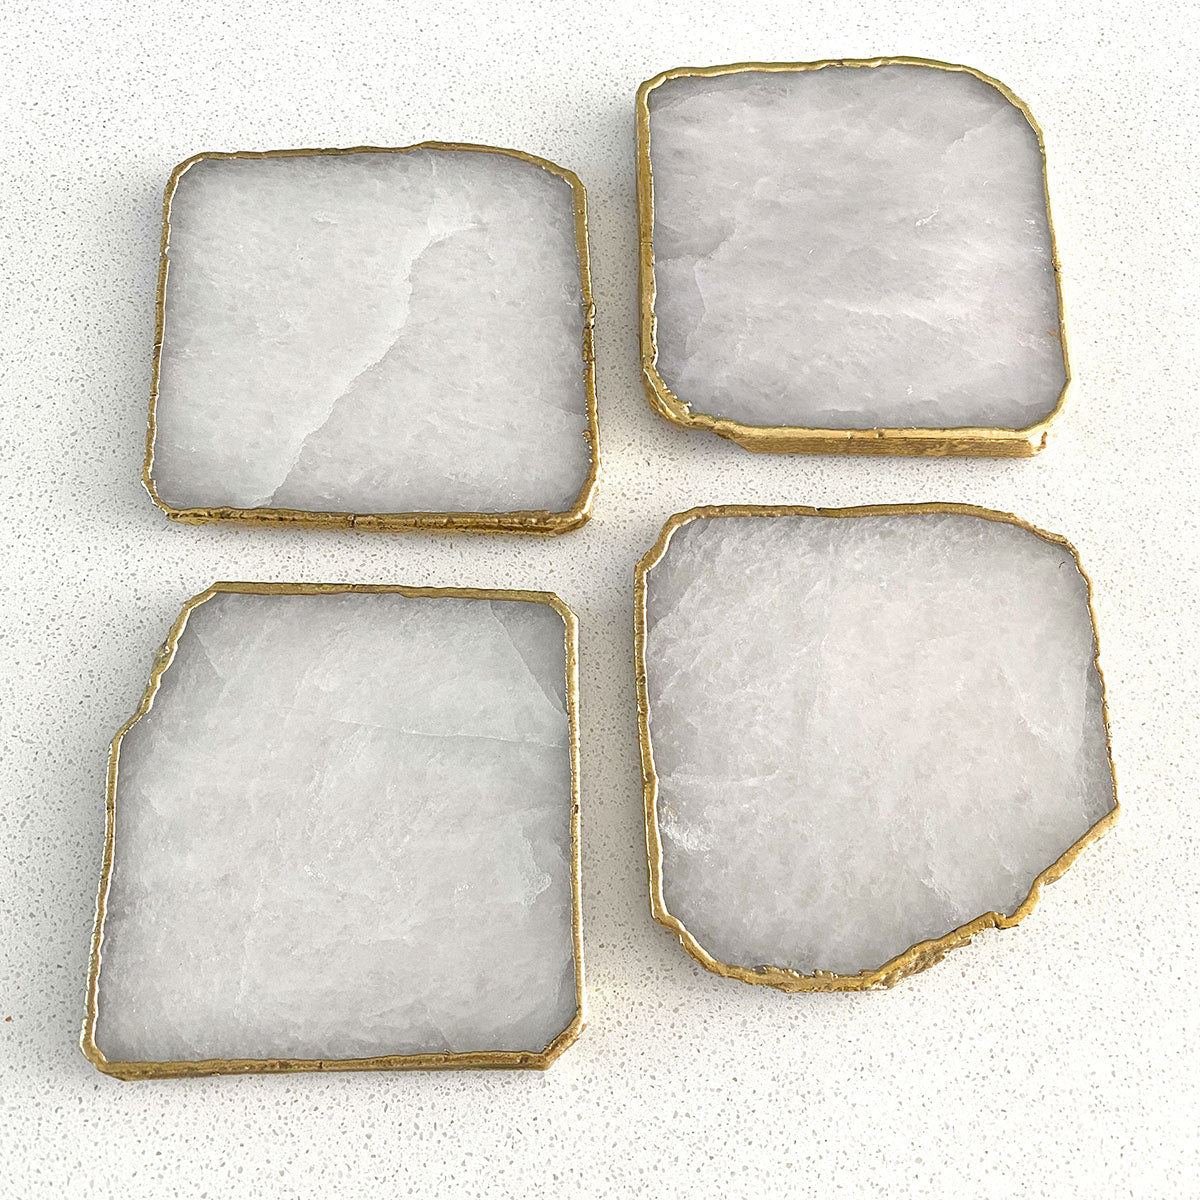 Agate Gold Edged Coasters in White Agate. Set of 4. Close up view